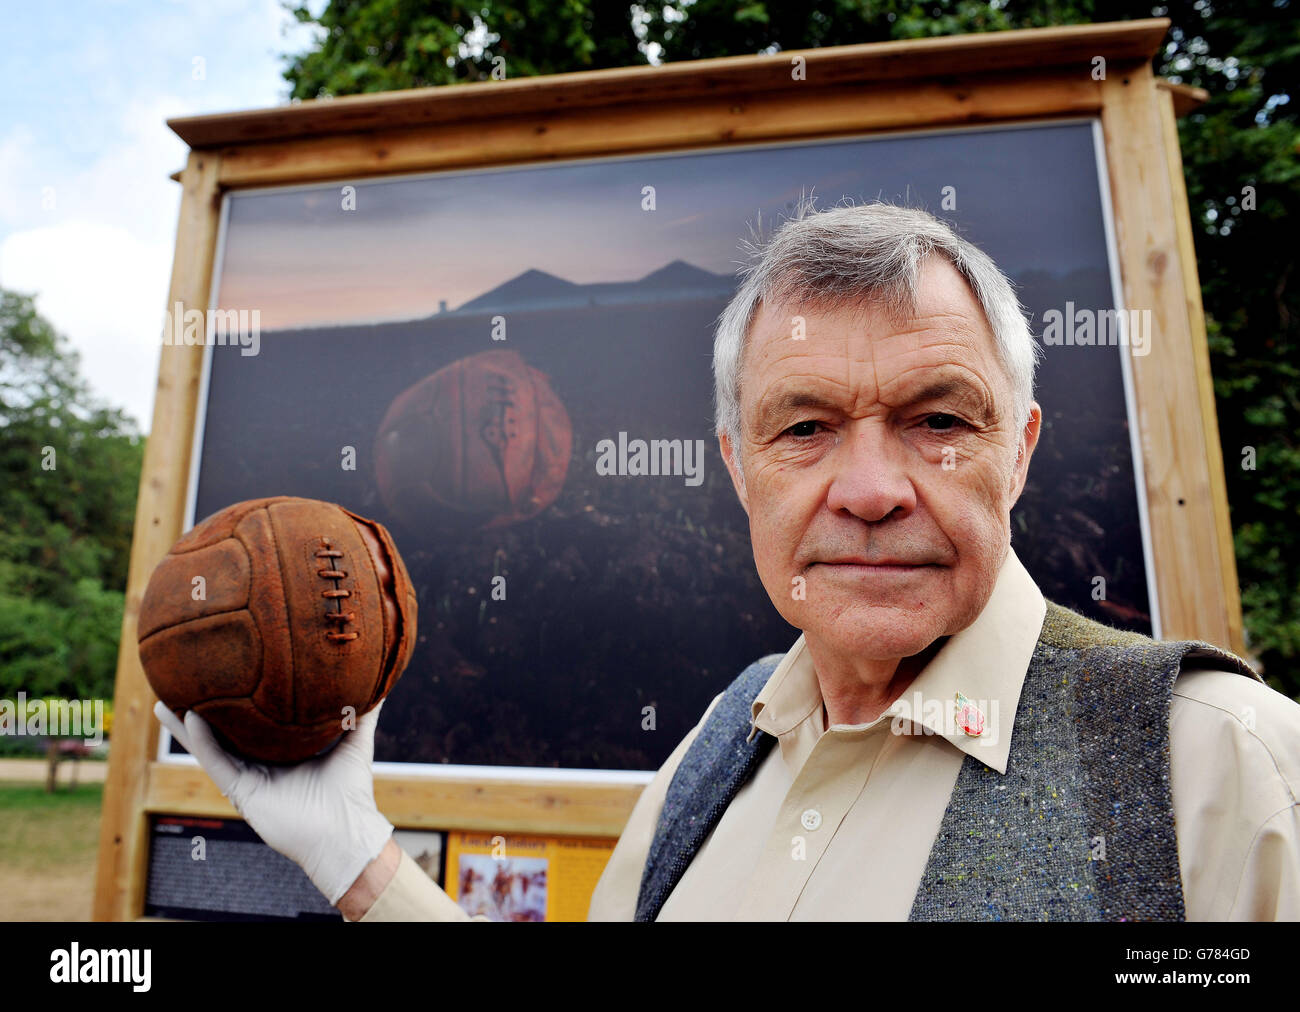 Photographer Michael St.Maur Sheil, holds the 'Loos Football' in front of his picture of the ball at Loos, which was kicked across no man's land by troops from the London Irish Regiment during the Battle of Loos in September 1915 as they advanced towards the enemy lines, during a preview of the Royal British Legion's Fields of Battle, Lands of Peace public street gallery in St James's Park central London, a series of present day photographs of WWI battlefields marking the centenary of the start of WWI. Stock Photo